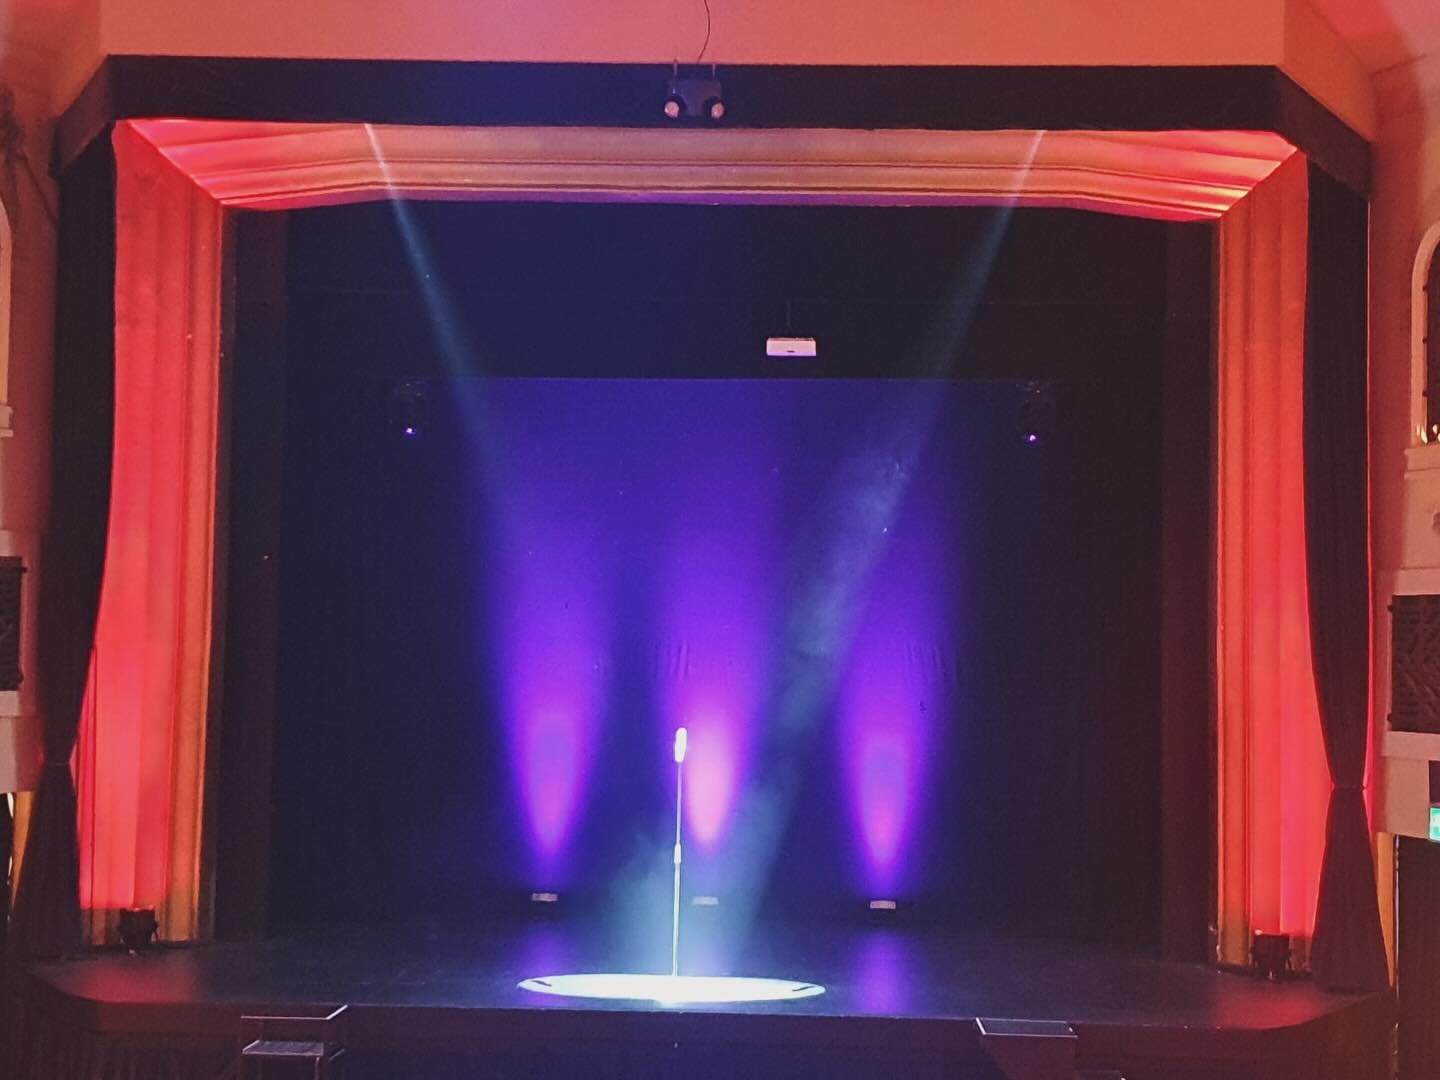 We&rsquo;re all set for @mrandyparsons show! 

#regaltenbury #regalcomedy #comedy #laughoutloud #andyparsons #whatsontenbury